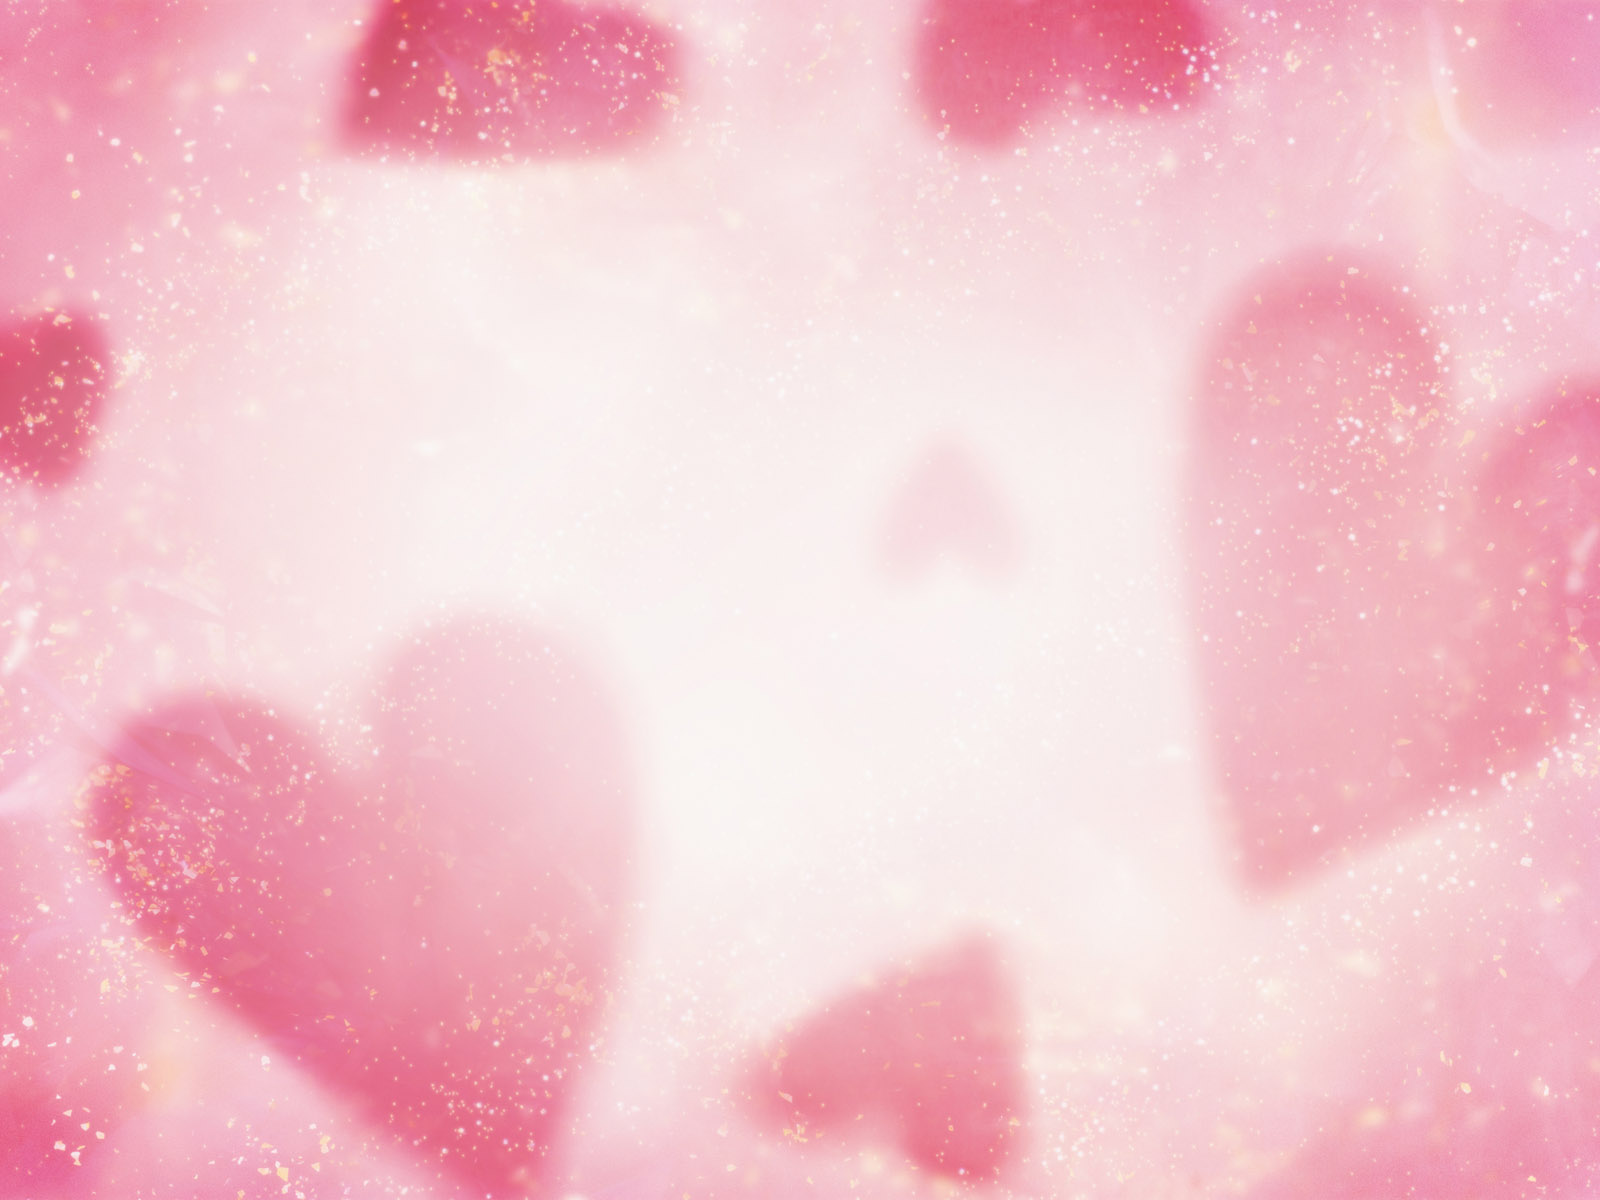 Scenery Wallpaper Includes Pink Little Hearts Sure To Please Its